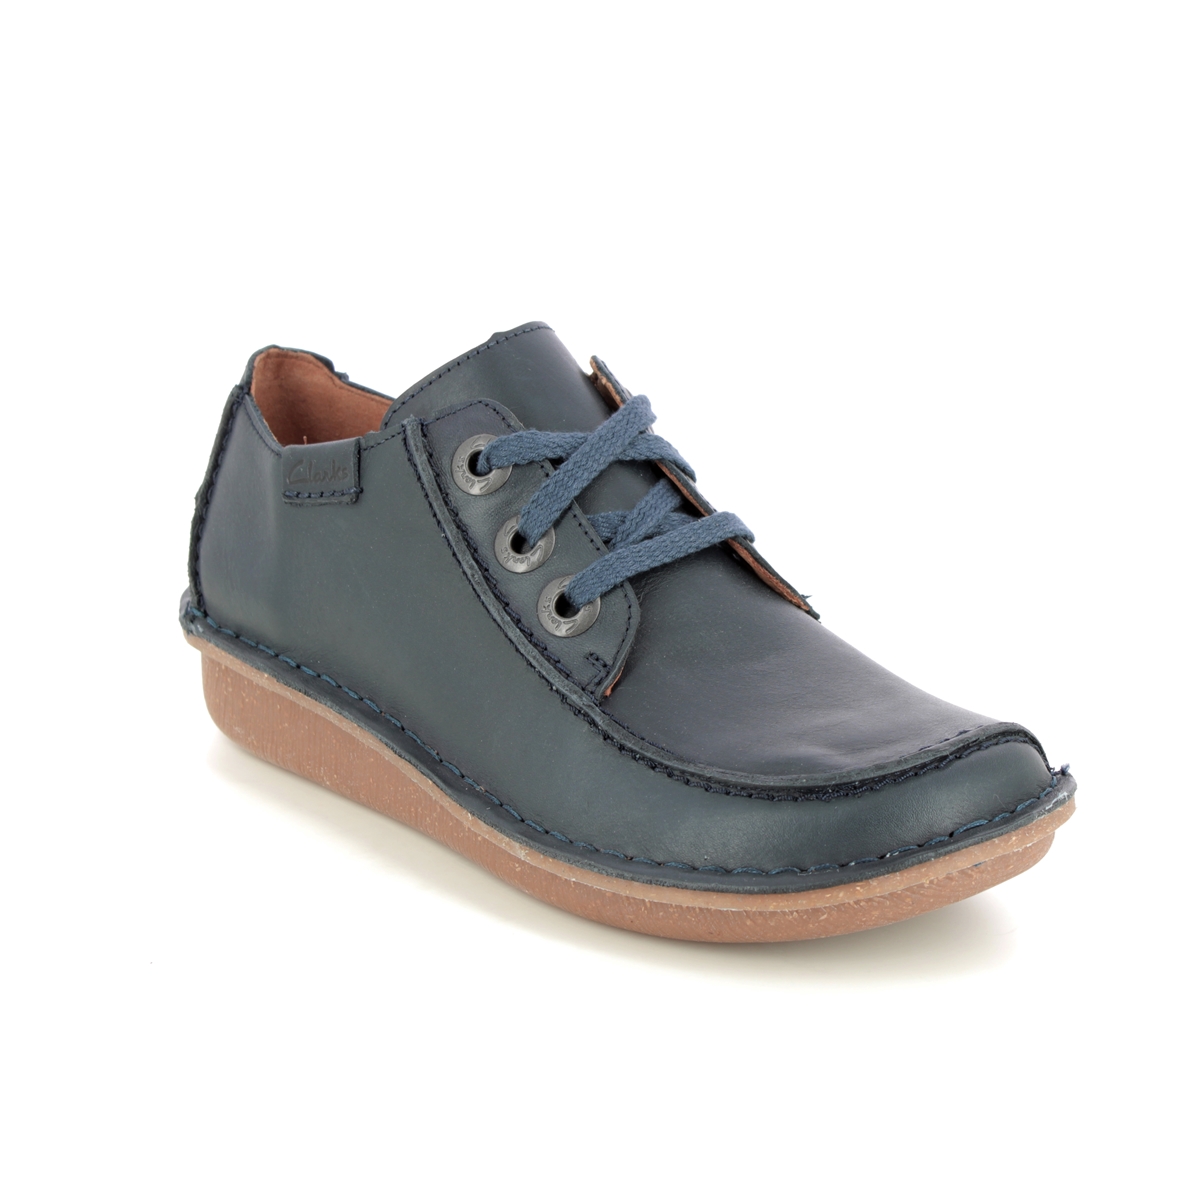 Clarks Funny Dream Navy Leather Womens Lacing Shoes 668184D In Size 6.5 In Plain Navy Leather